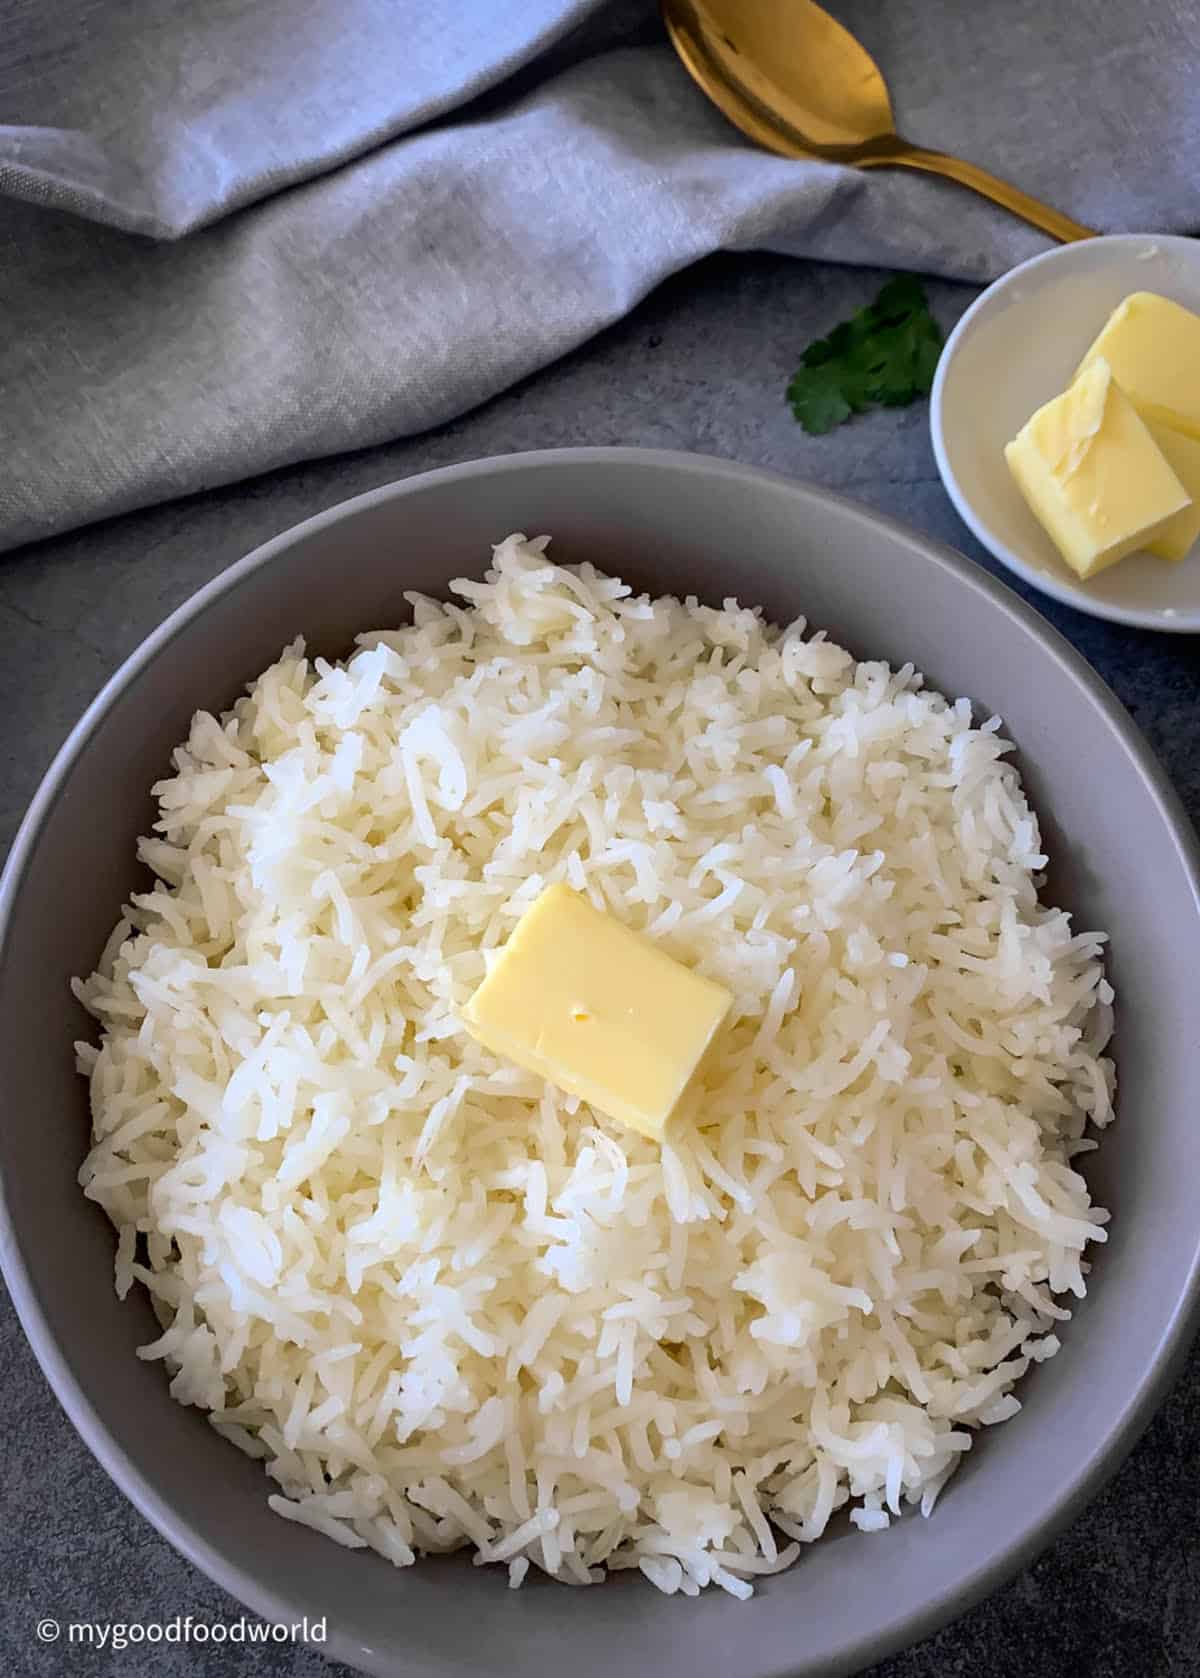 Cooked buttery rice is placed in a serving bowl with a cube of butter on top as garnish. Some more butter is placed in a plate next to the bowl, along with a gold color spoon, a cloth napkin and cilantro.